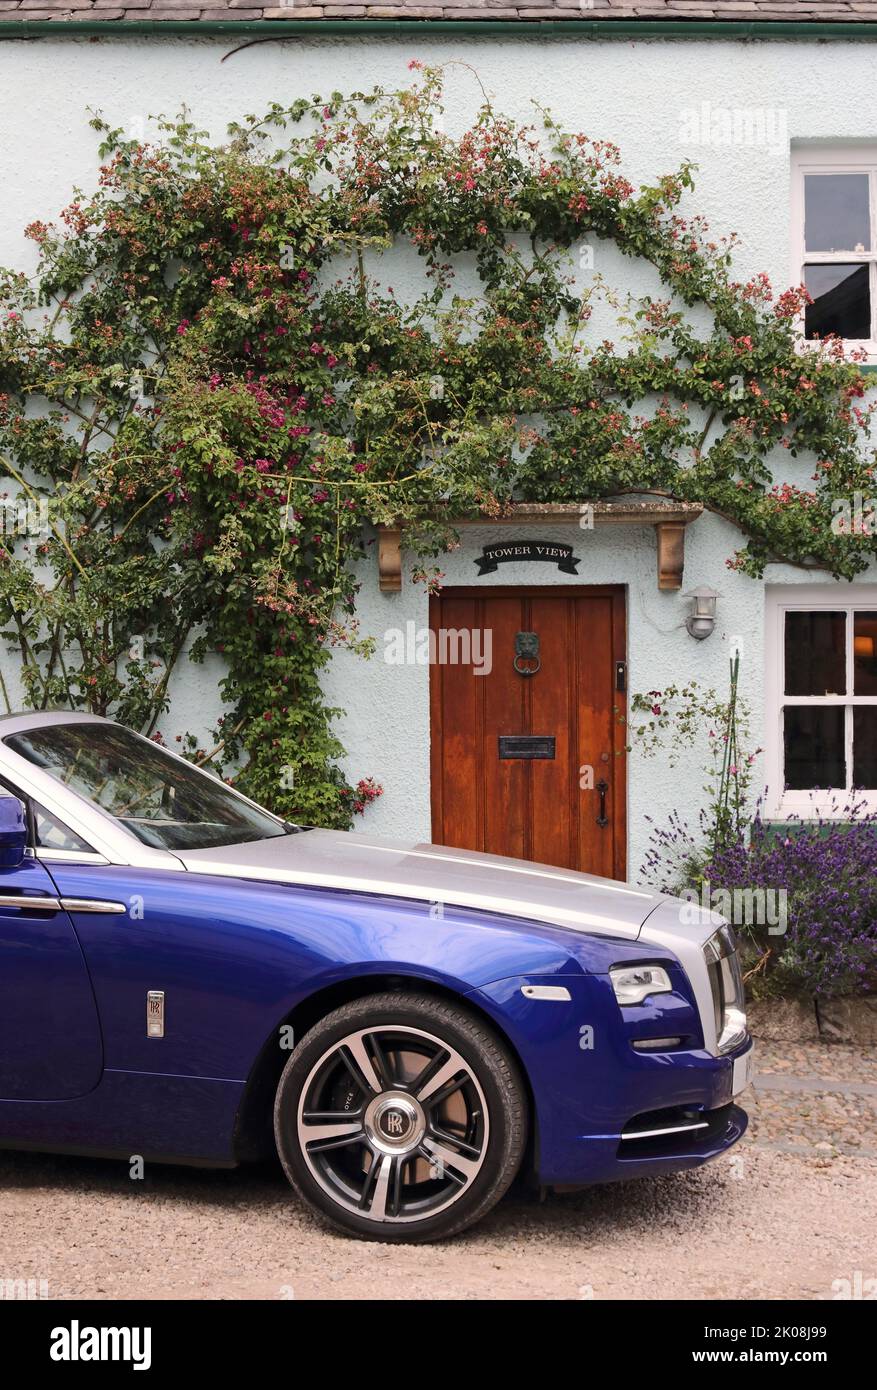 Blue and silver Rolls Royce Dawn convertible parked outside country cottage Stock Photo